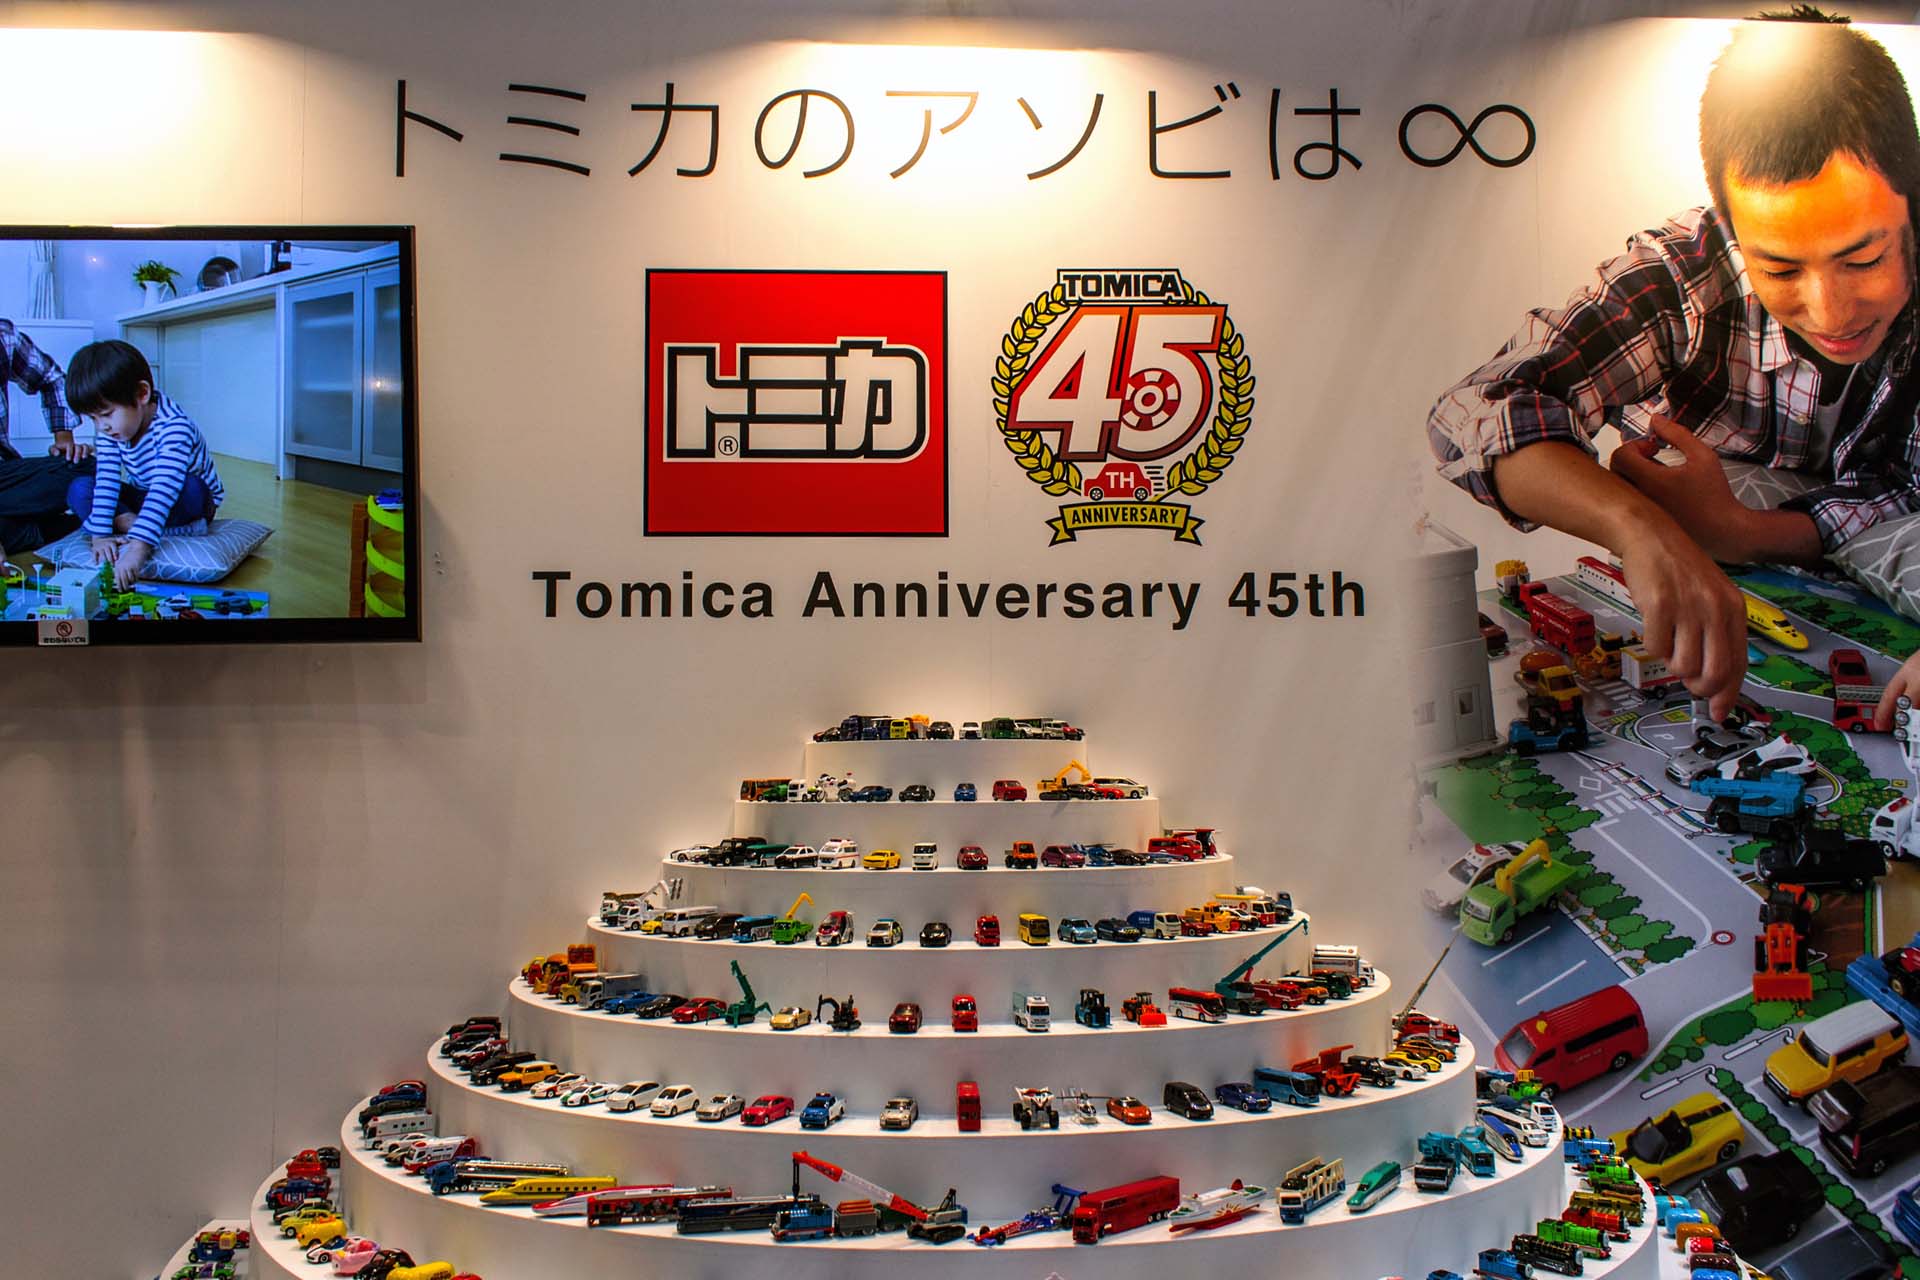 The cars were an instant success. Previously, Japanese kids only had access to imported Matchbox cars, but now they could own miniature versions of the cars their parents drove. Today, the Tomica line has grown to hundreds of models.